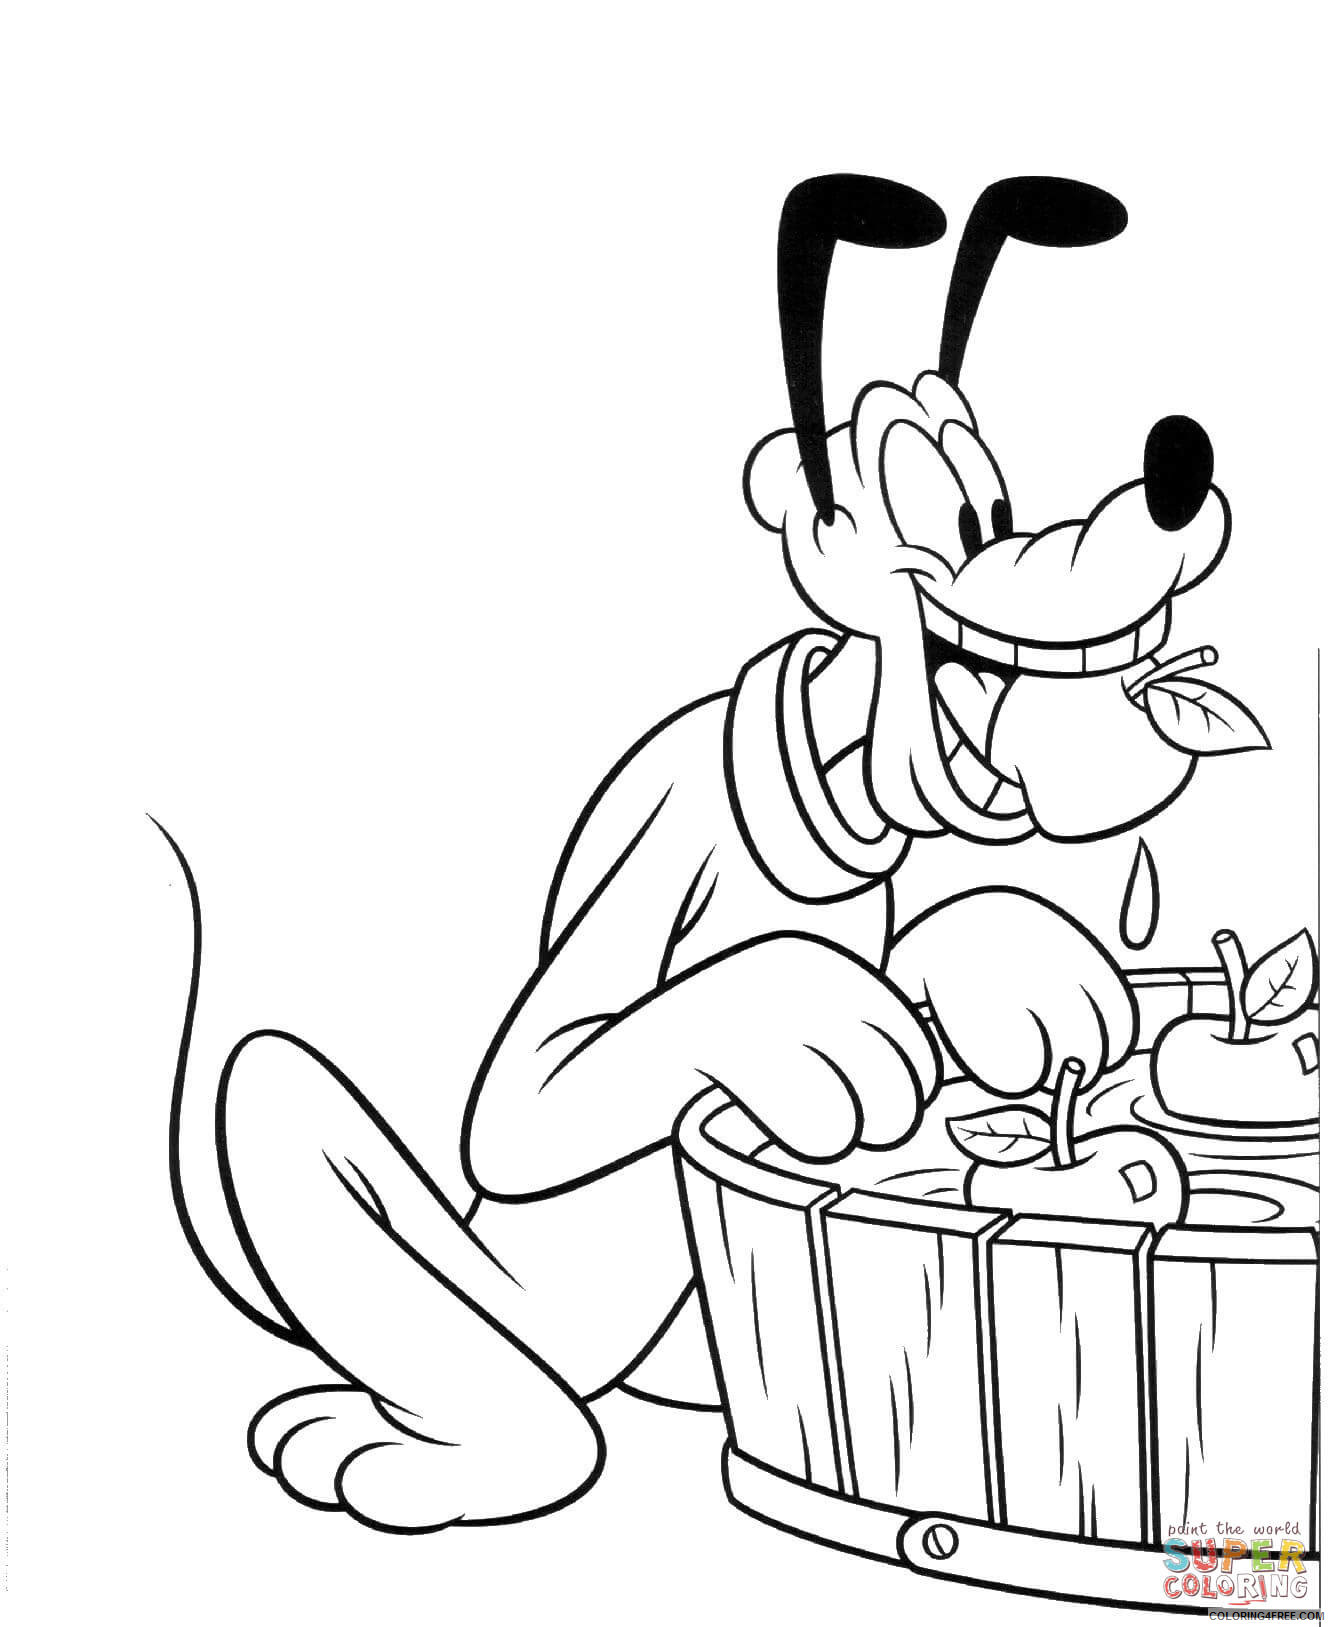 Pluto Coloring Pages Cartoons Pluto Bobbing for Apples Printable 2020 4960 Coloring4free